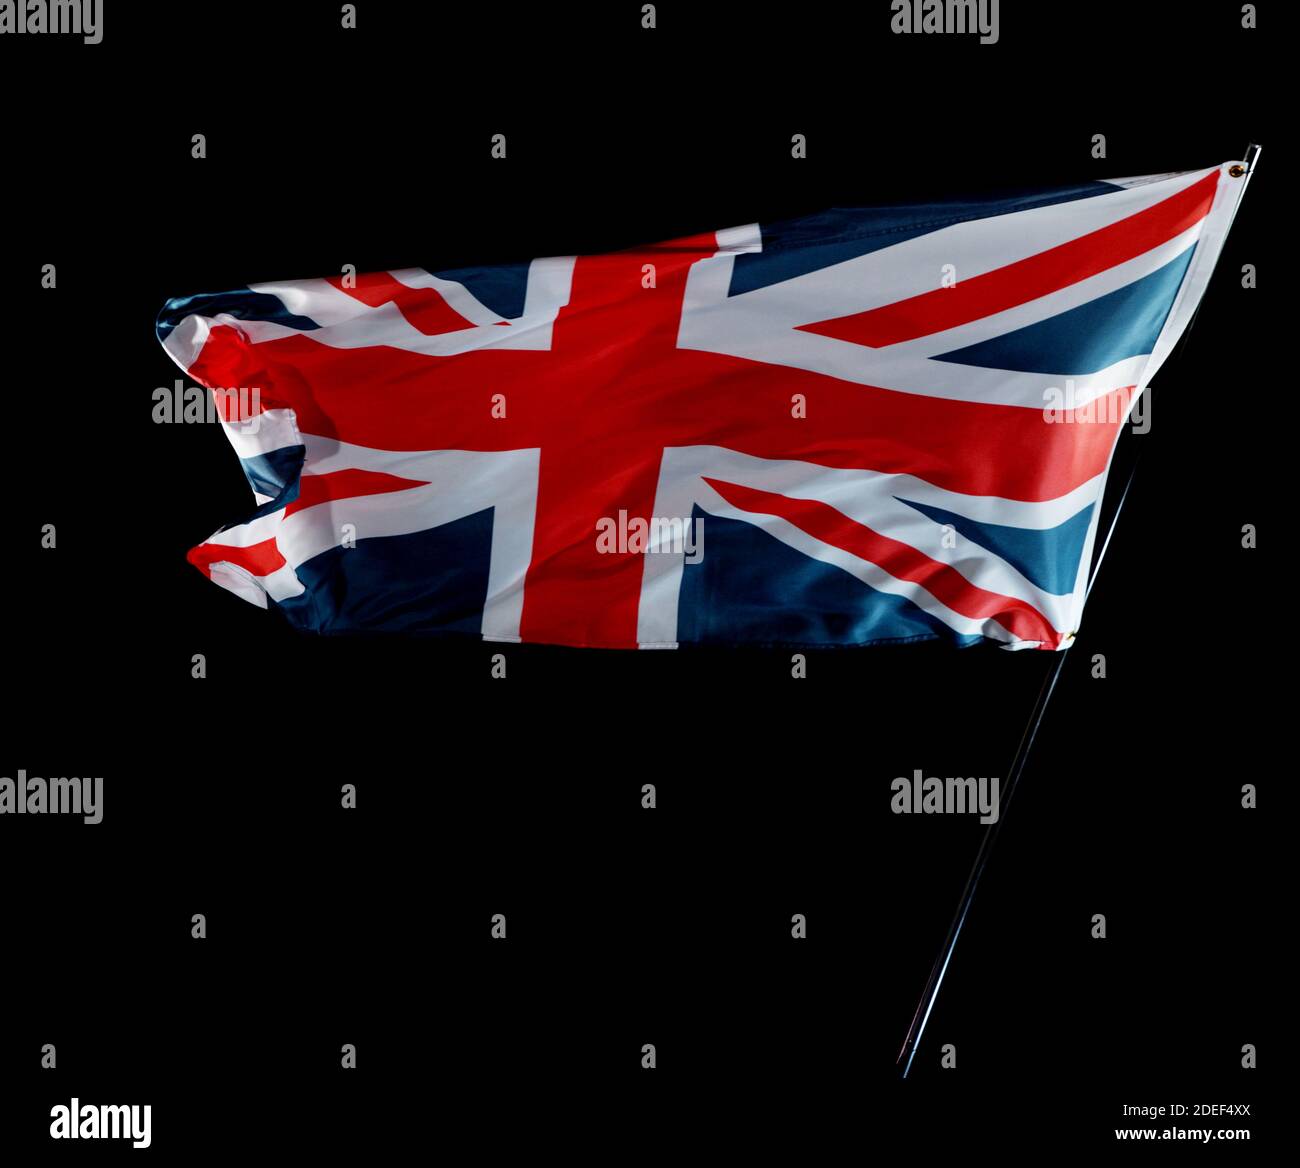 United Kingdom flag blowing in the wind isolated against a black background, studio shot. Stock Photo